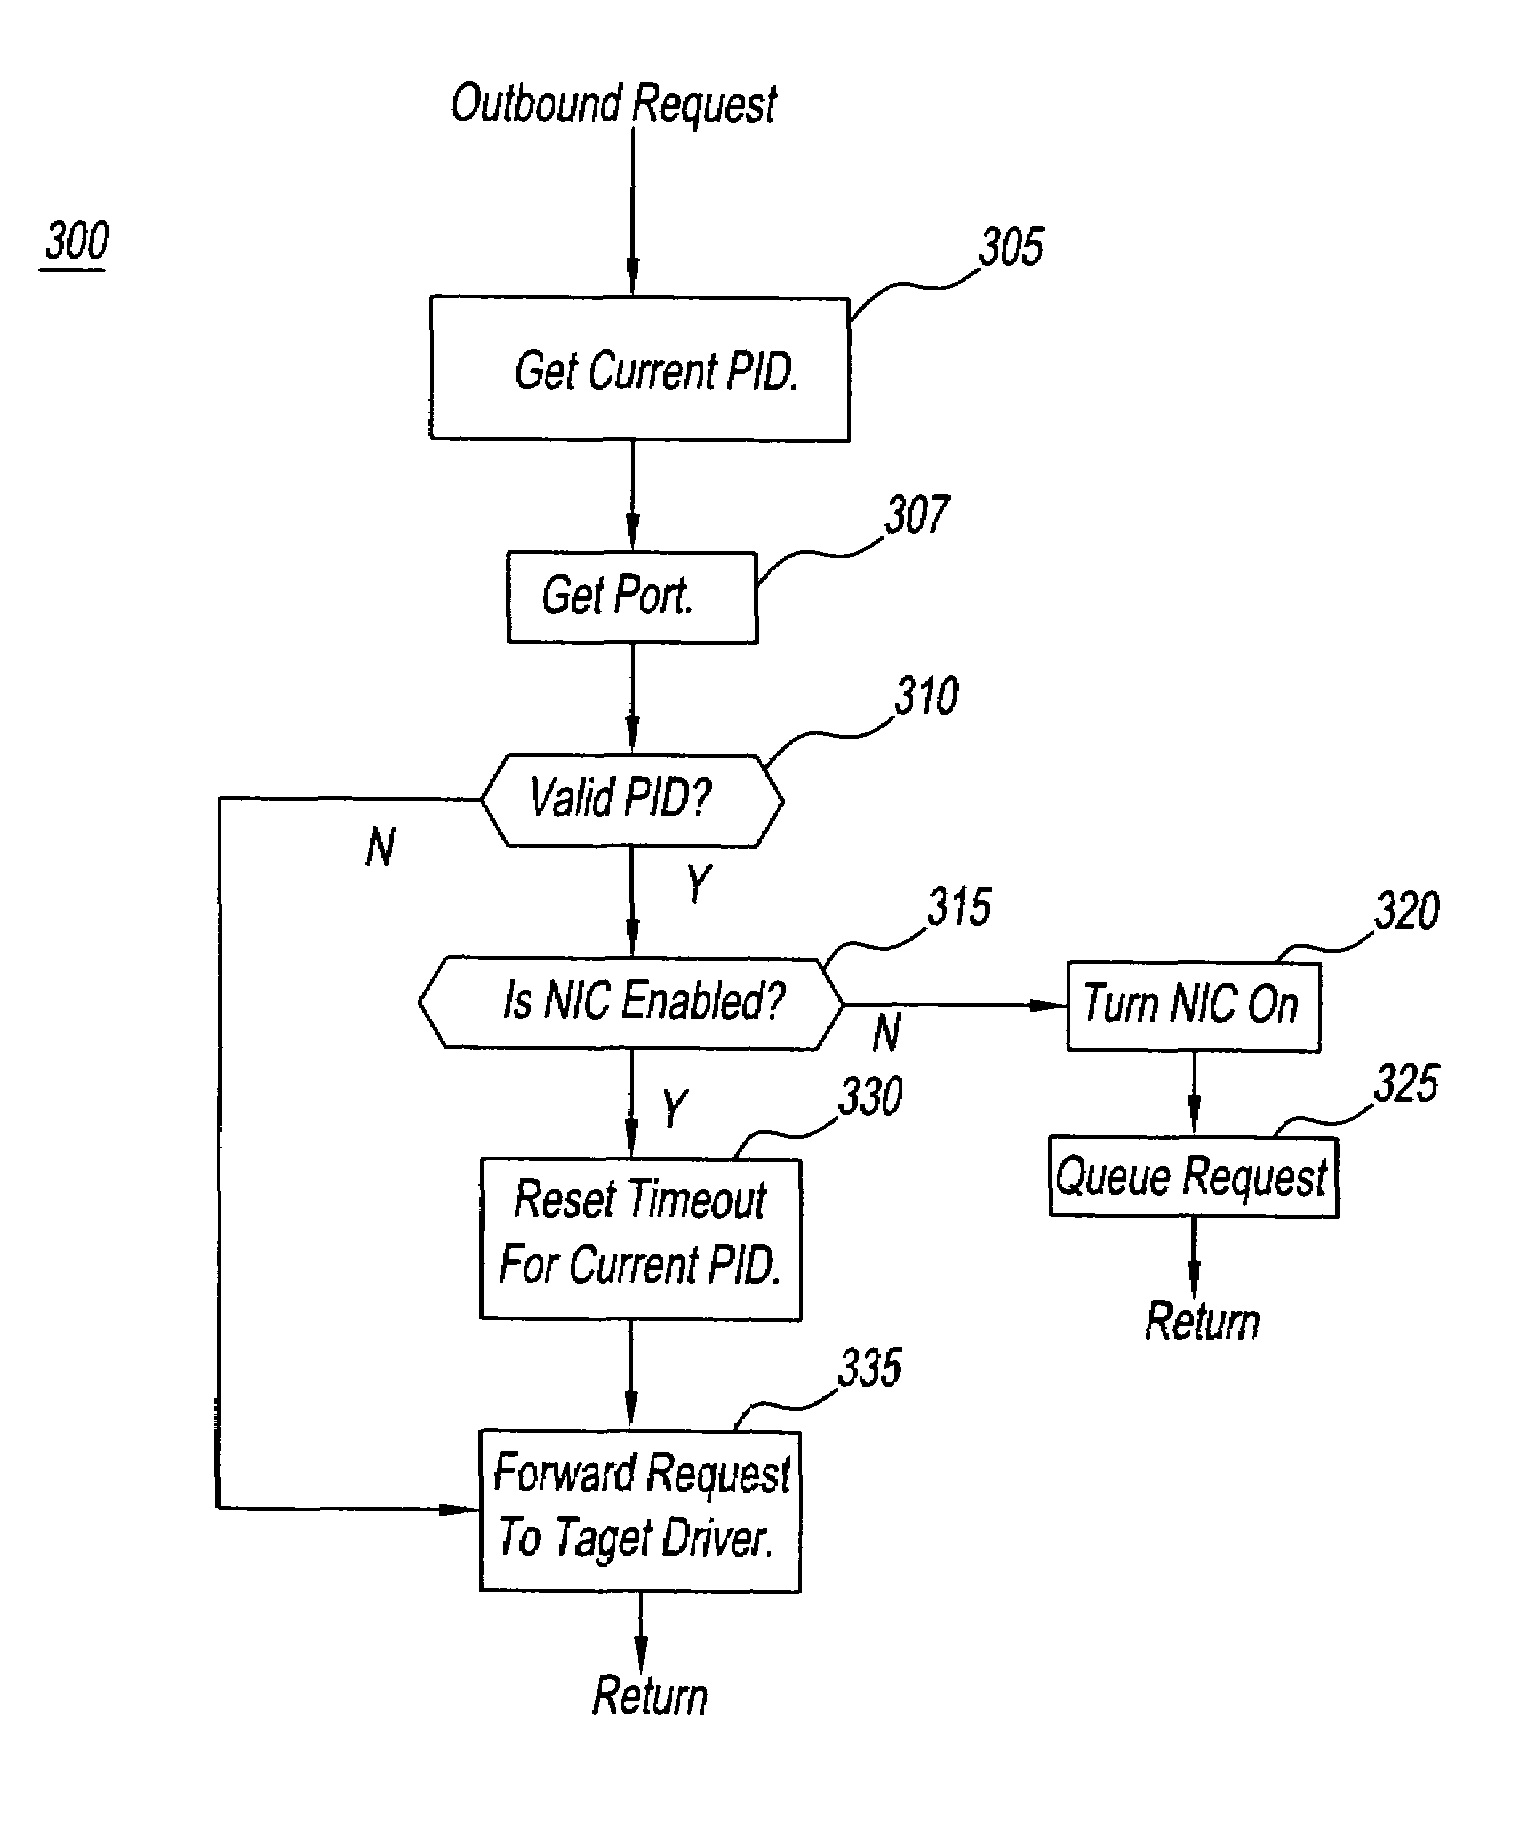 Computer and method for on-demand network access control